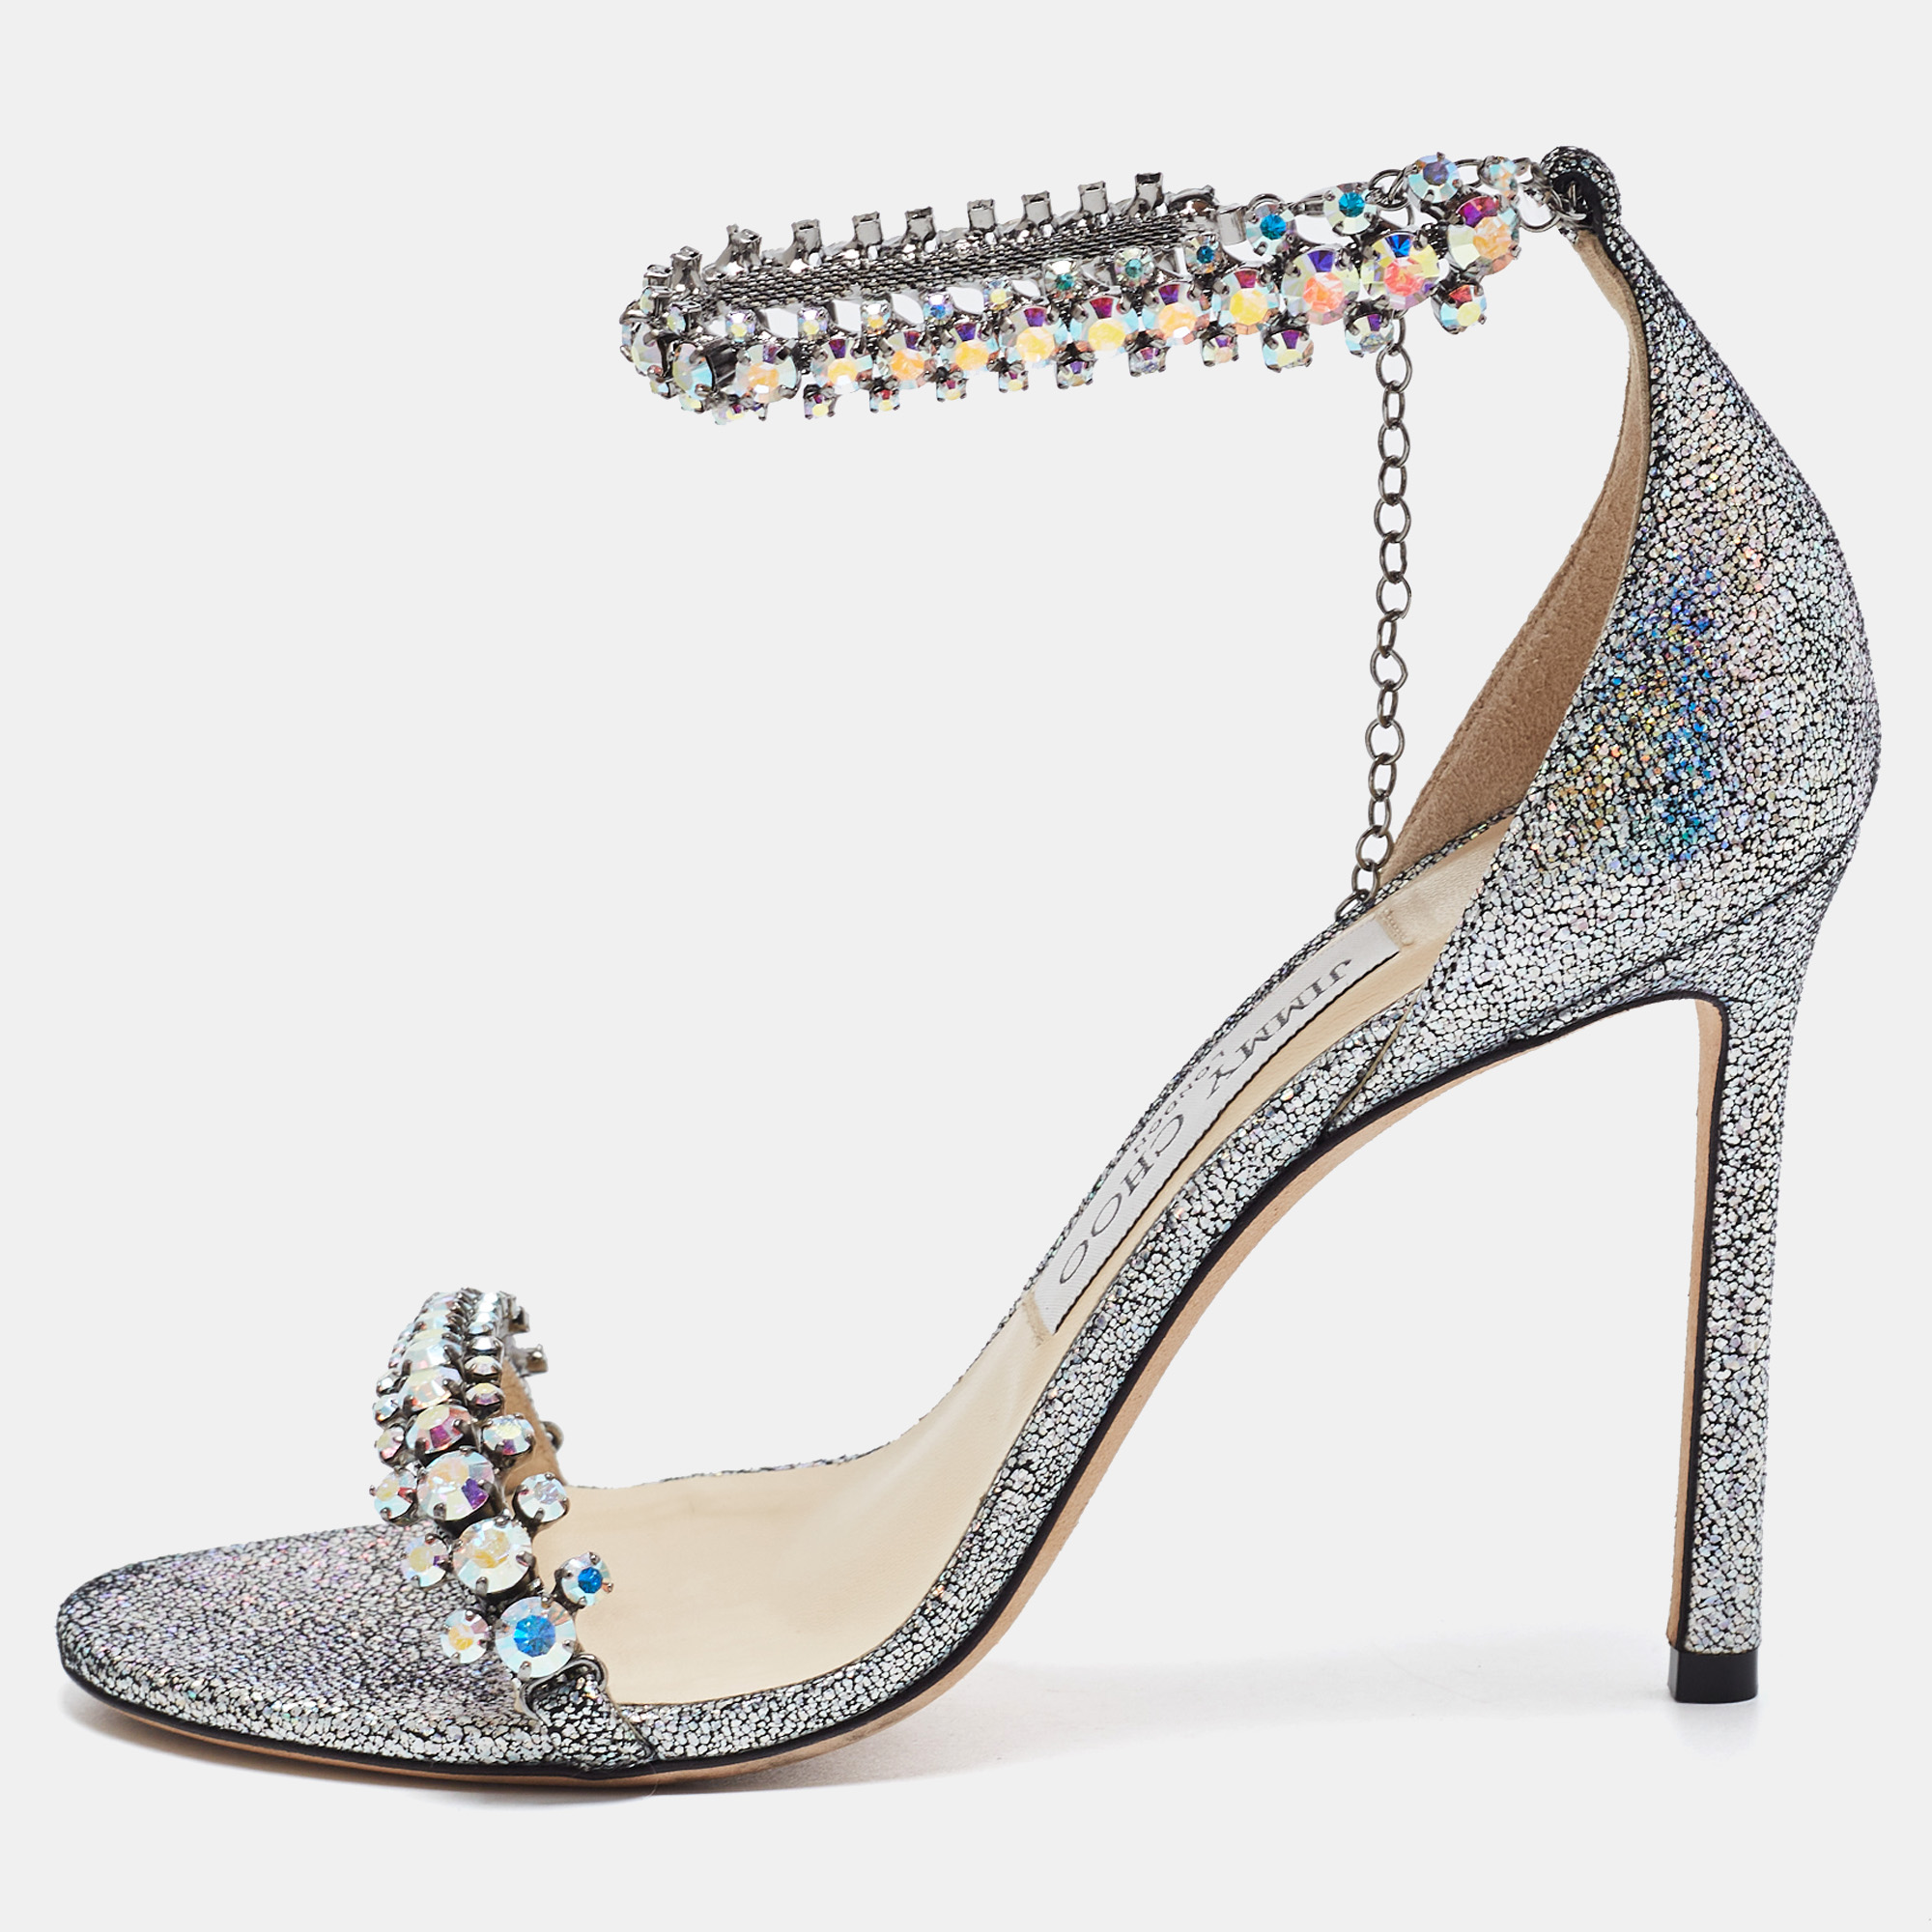 Pre-owned Jimmy Choo Multicolor Glitter Suede Shiloh Crystal Embellished Ankle Cuff Sandals Size 36